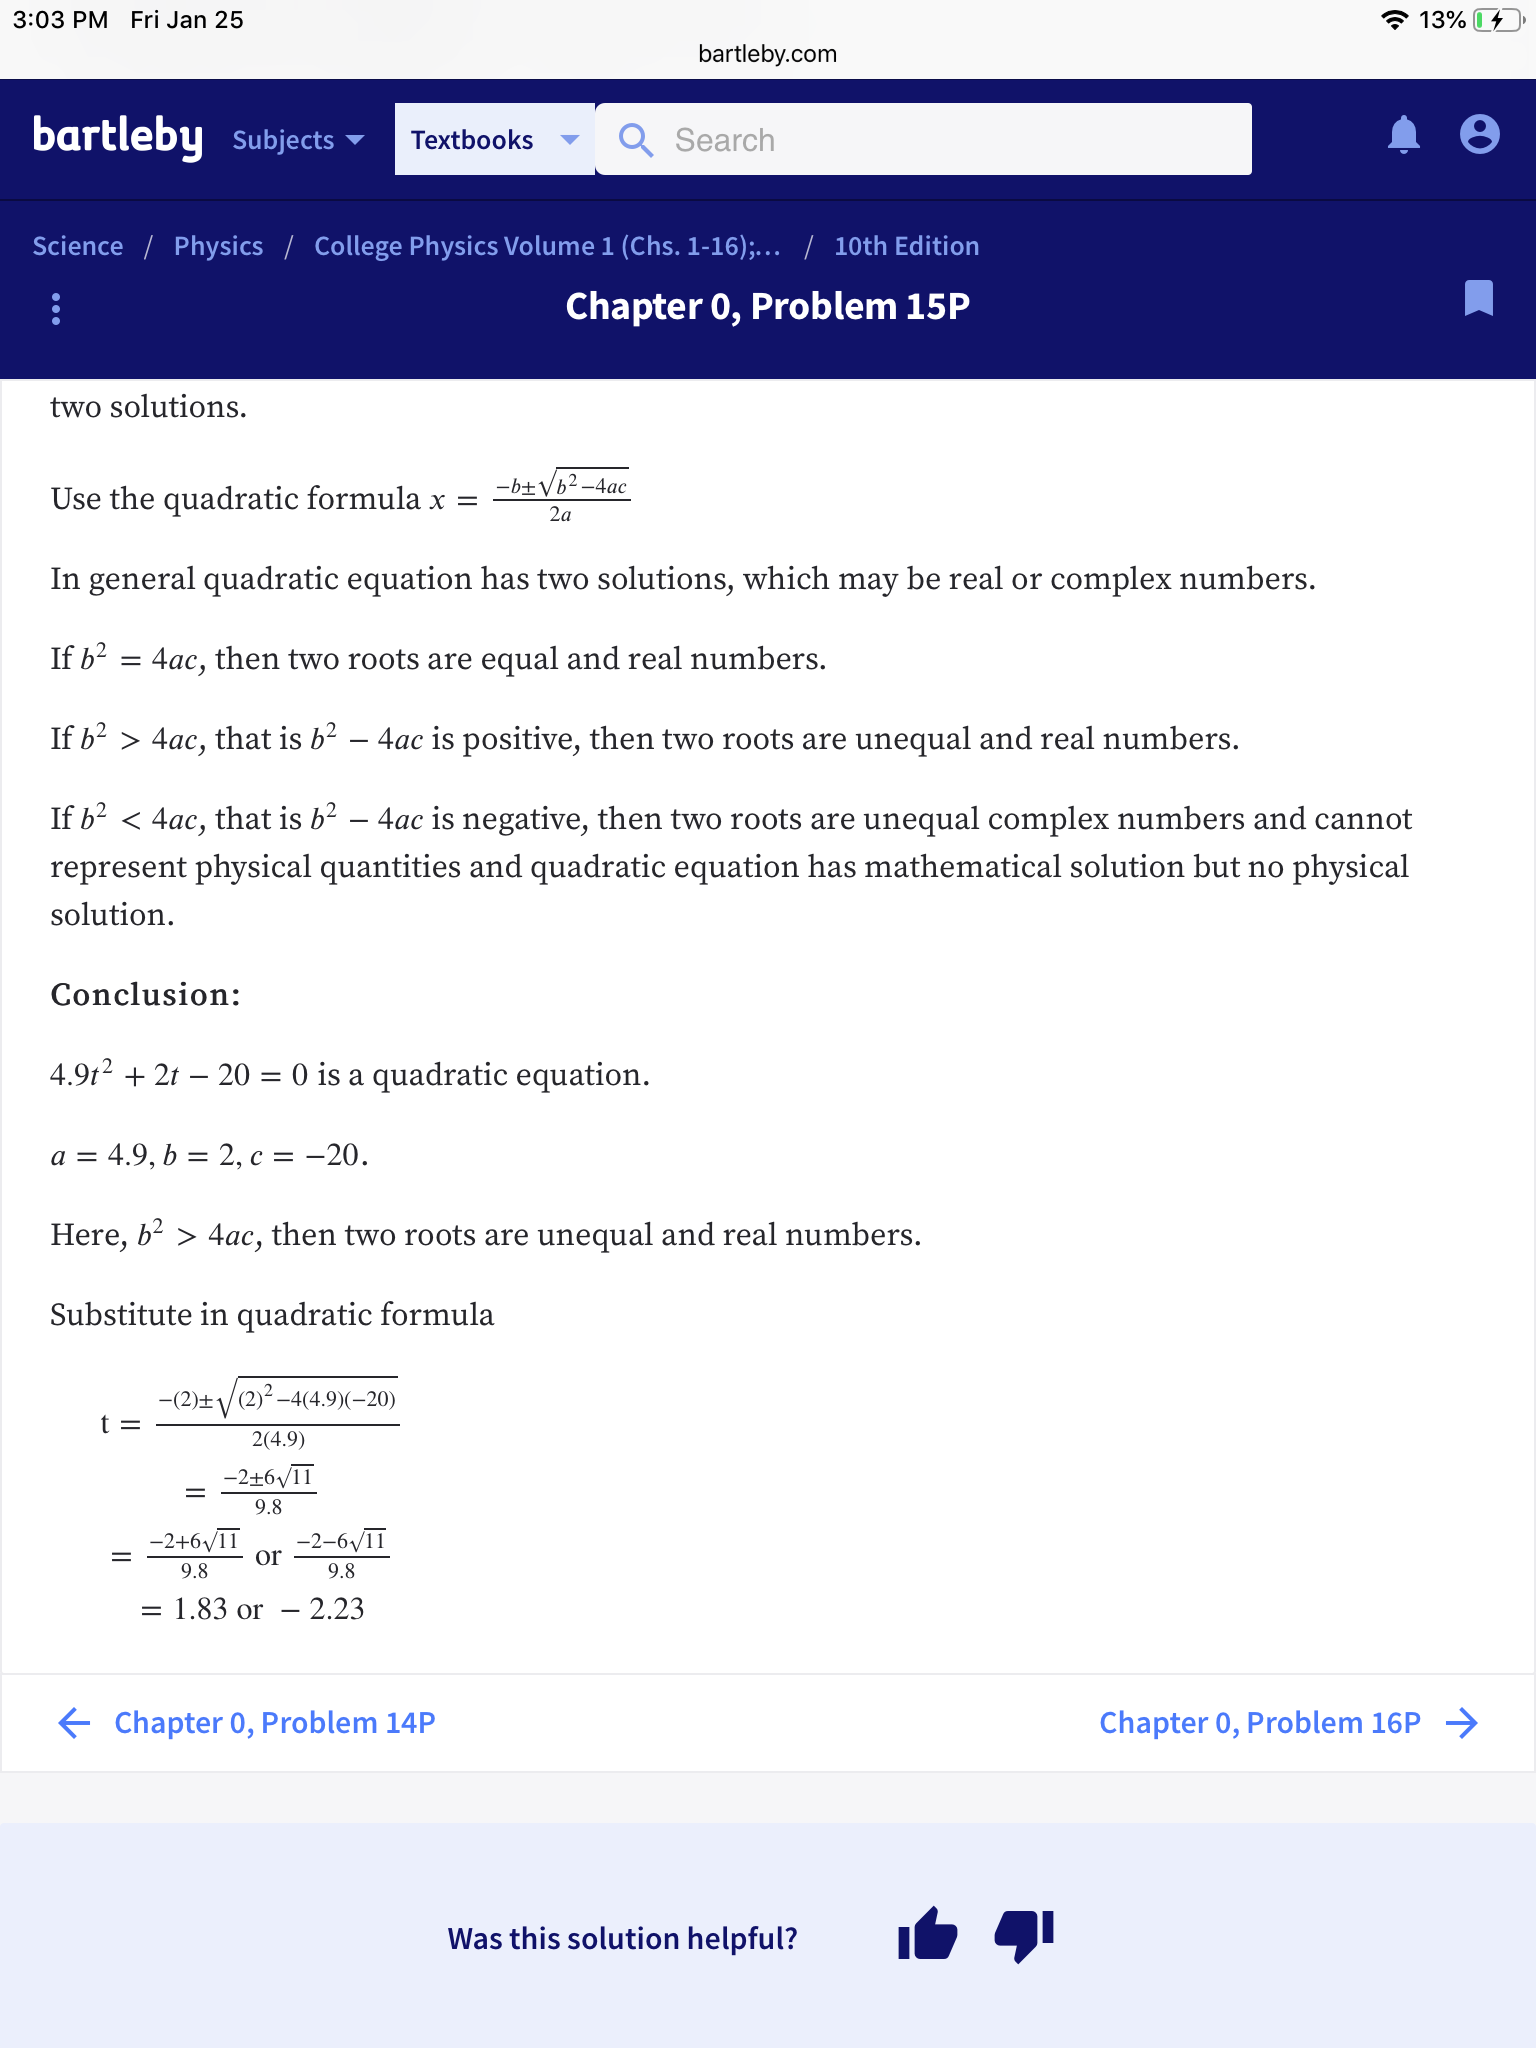 3:03 PM Fri Jan 25
139
bartleby.com
bartleby subjects
Search
Textbooks
Science
Physics
College Physics Volume 1 (Chs. 1-16),
10th Edition
Chapter 0, Problem 15P
two solutions.
Use the quadratic formula x =
In general quadratic equation has two solutions, which may be real or complex numbers.
If b2 - 4ac, then two roots are equal and real numbers.
If b2 〉 4ac, that is b2-4ac is positive, then two roots are unequal and real numbers.
If b2く4ac, that is b2-4ac is negative, then two roots are unequal complex numbers and cannot
represent physical quantities and quadratic equation has mathematical solution but no physical
solution
Conclusion:
4.9t2 + 2t -20- 0 is a quadratic equation
Here, b- > 4ac, then two roots are unequal and real numbers.
Substitute in quadratic formula
2(4.9)
9.8
-2+6/1-2-6/11
Or
9.8
9.8
1.83 or - 2.23
Chapter 0, Problem 14P
Chapter 0, Problem 16P
Was this solution helpful?
